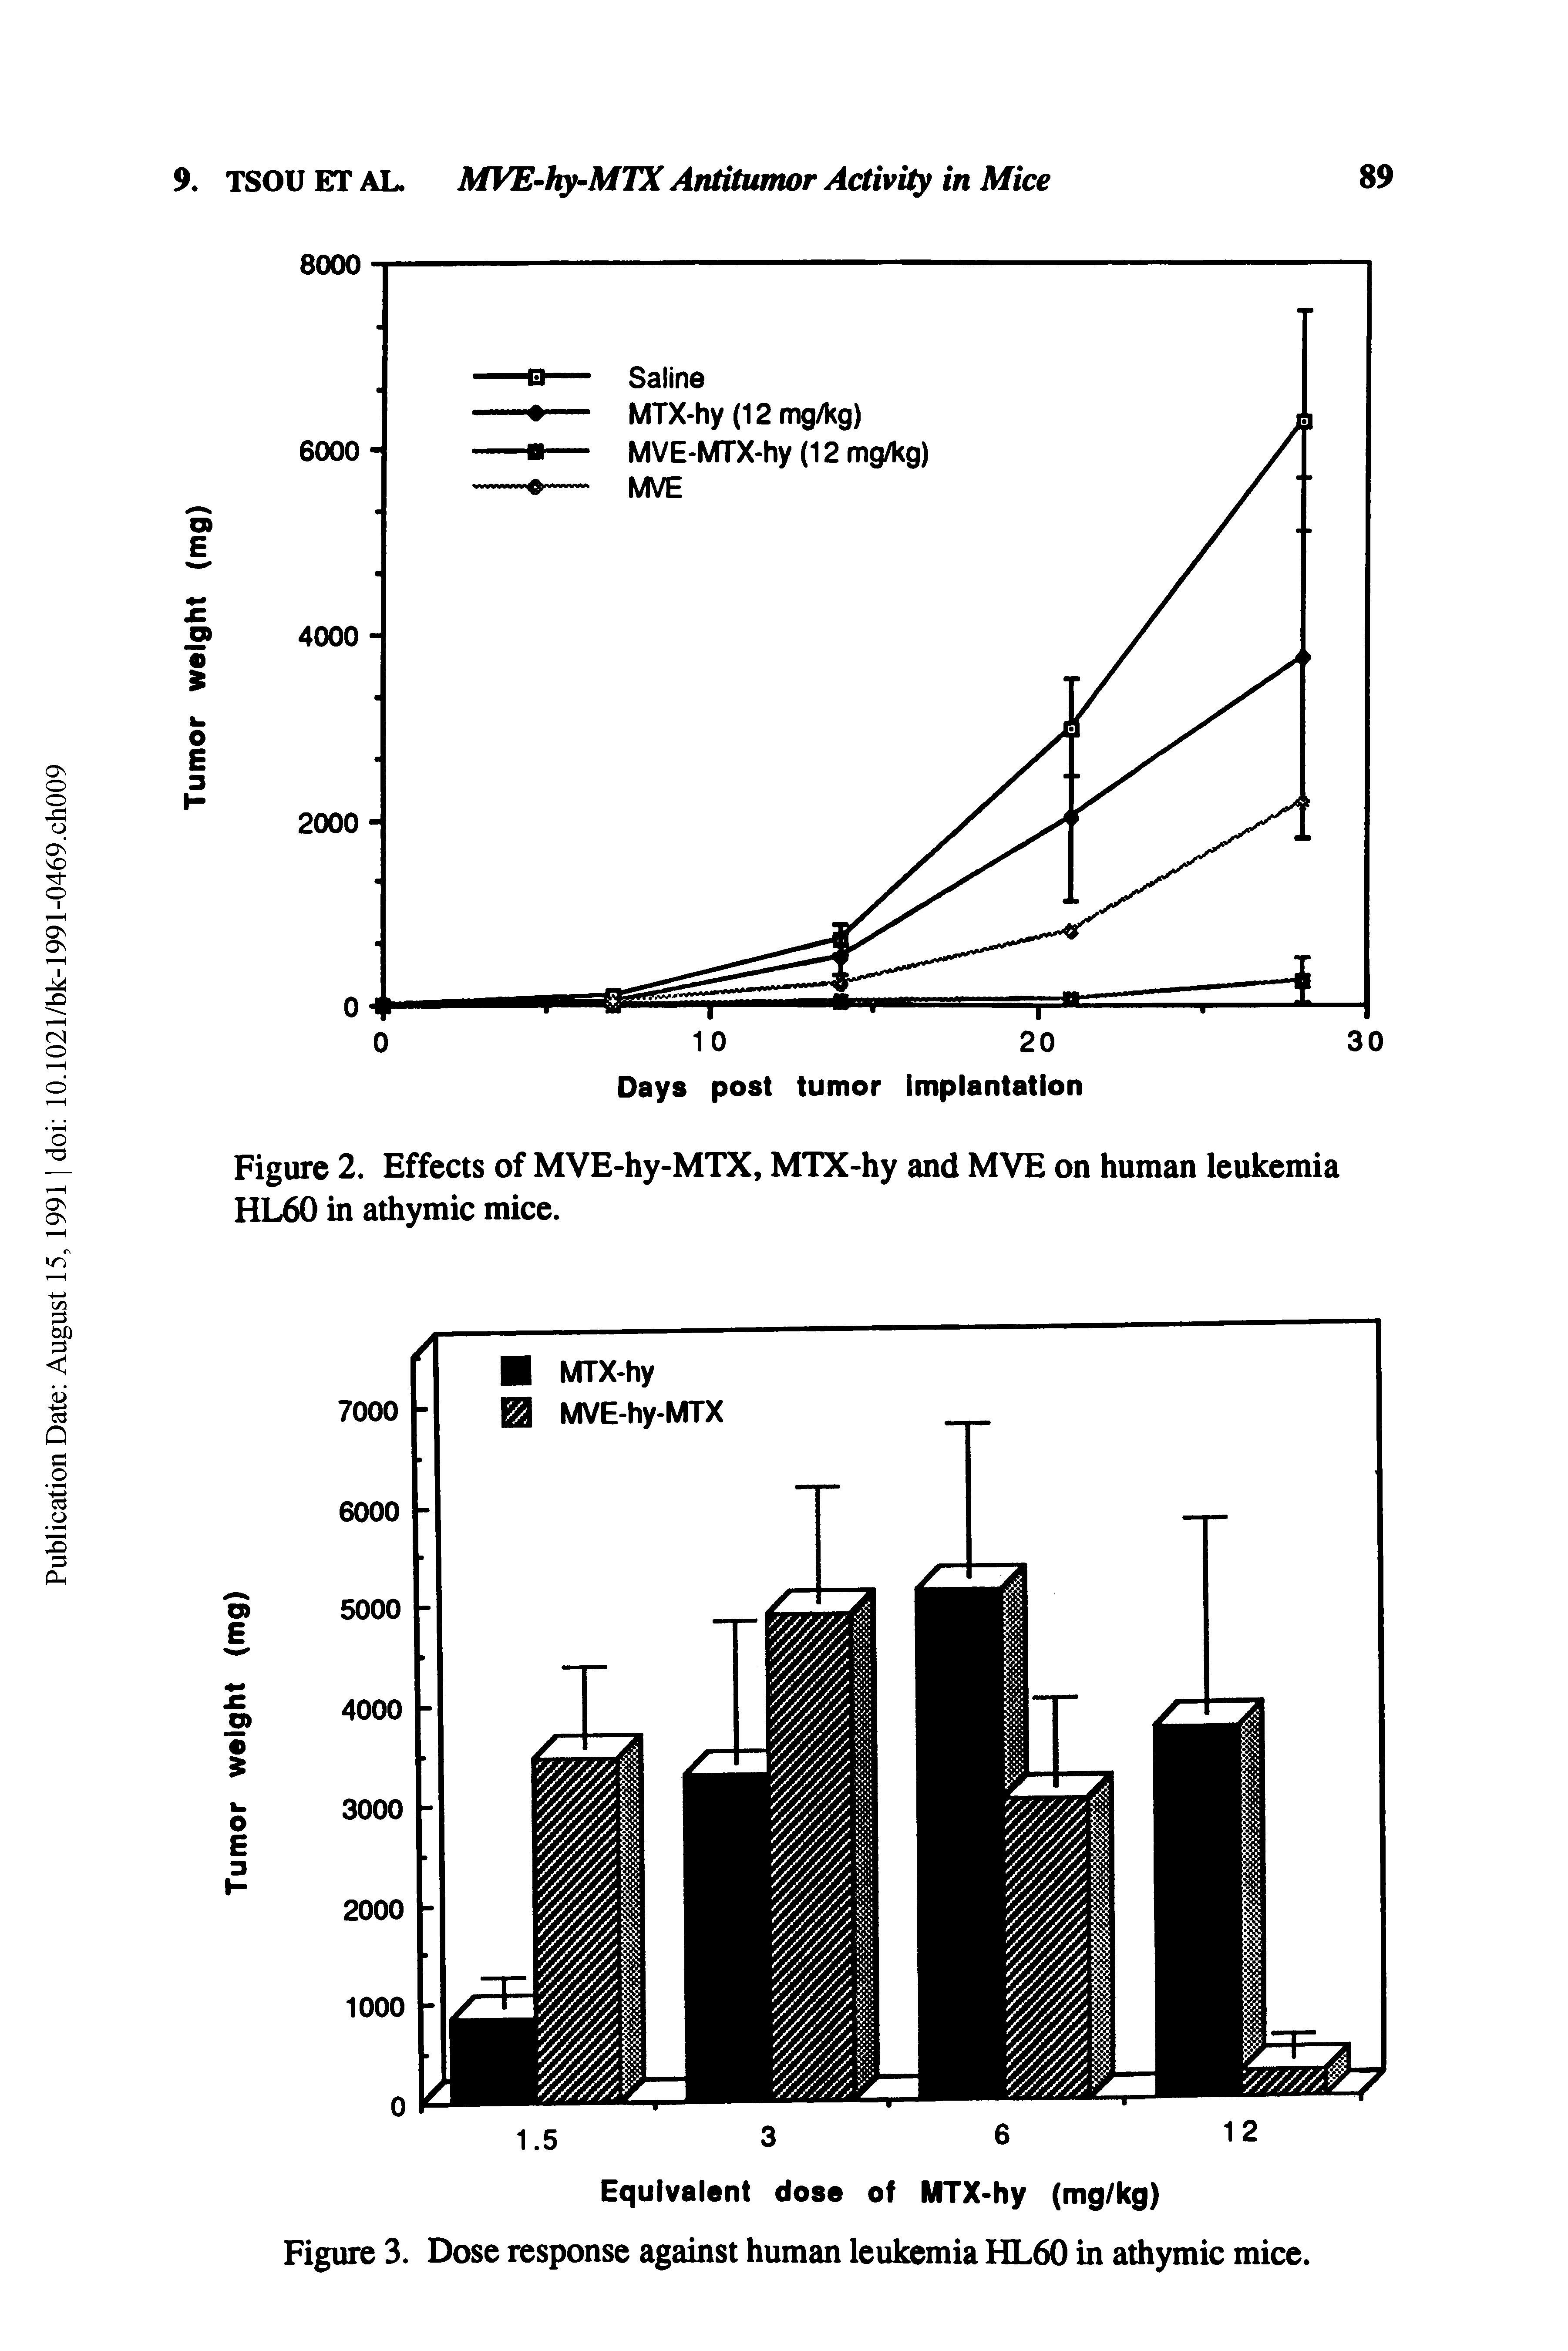 Figure 2. Effects of MVE-hy-MTX, MTX-hy and MVE on human leukemia HL60 in athymic mice.